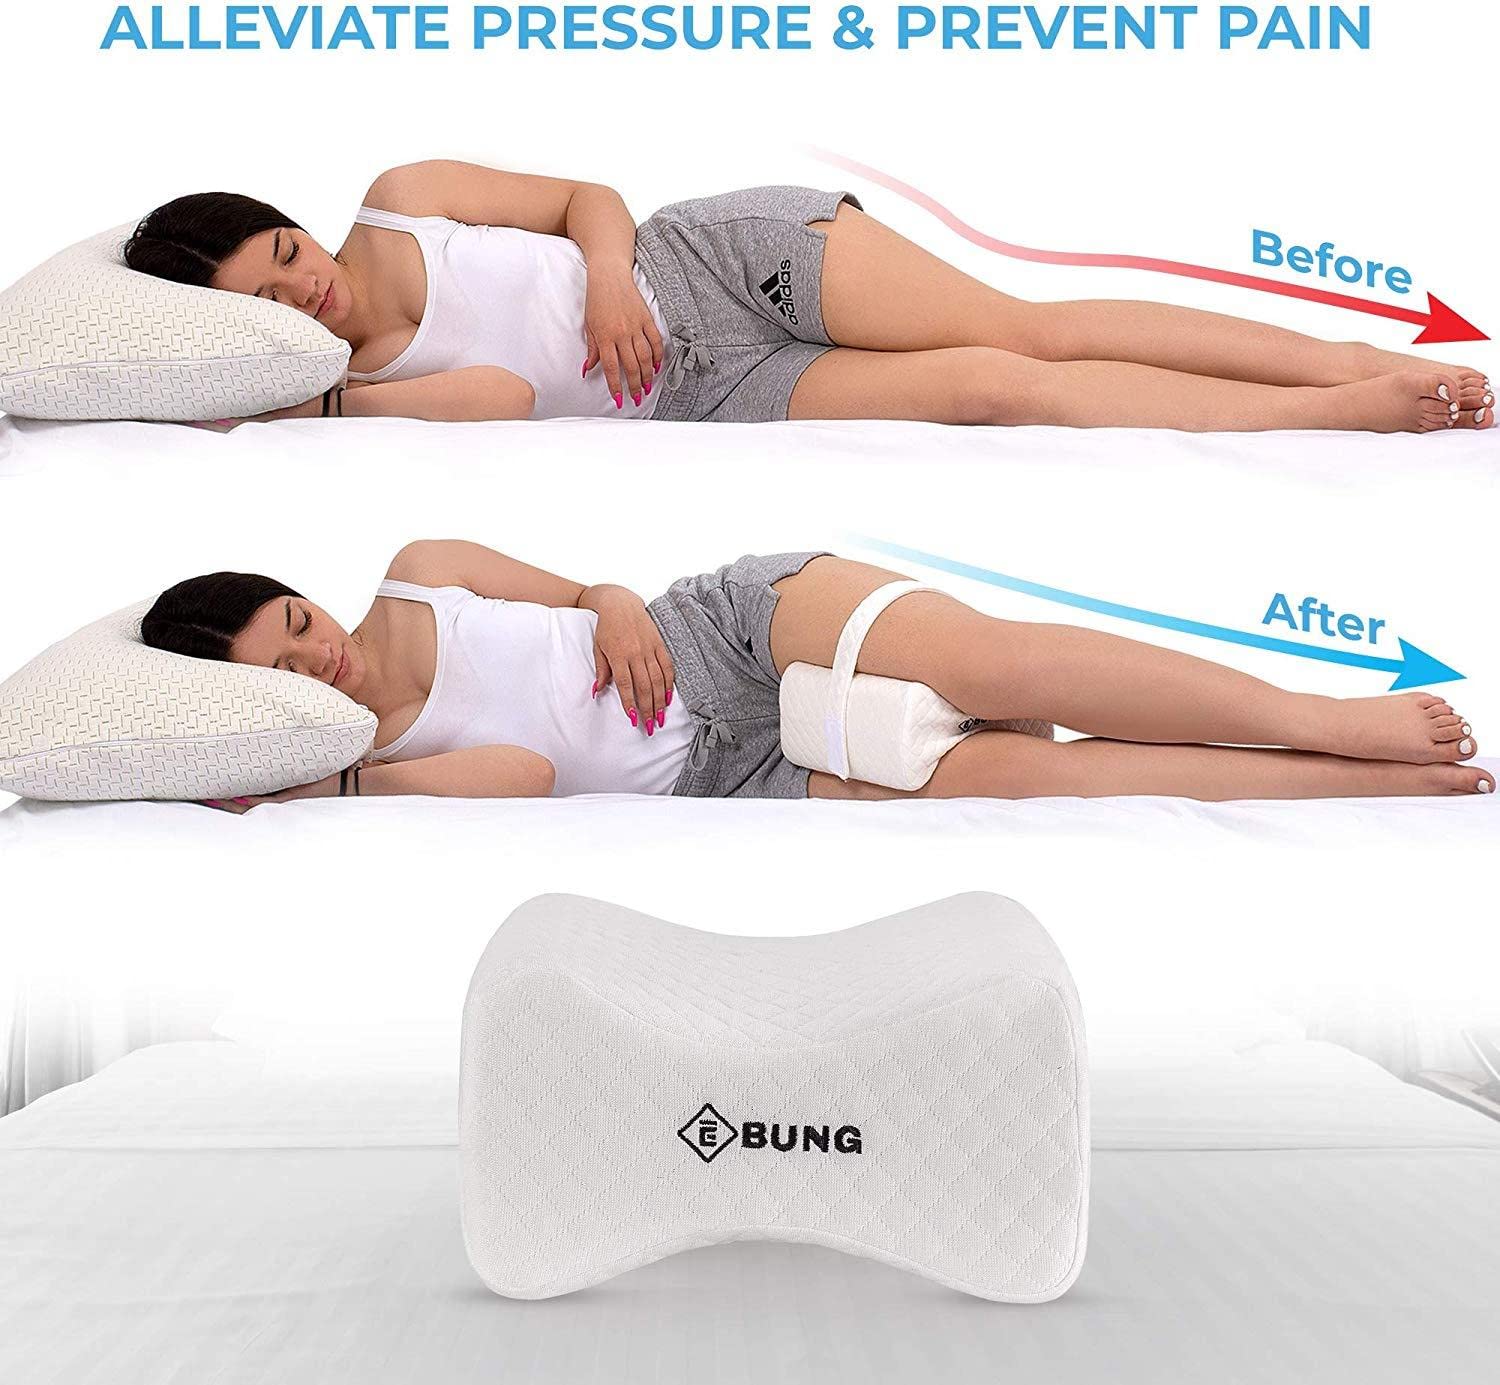 Knee Pillow with Adjustable and Removable Strap for Hip, Back, Leg, Knee Pain Relief -Leg Pillow- Ideal for Side Sleepers, Pregnancy and Spine Alignment Memory Foam Wedge Contour with Washable Cover  - Like New